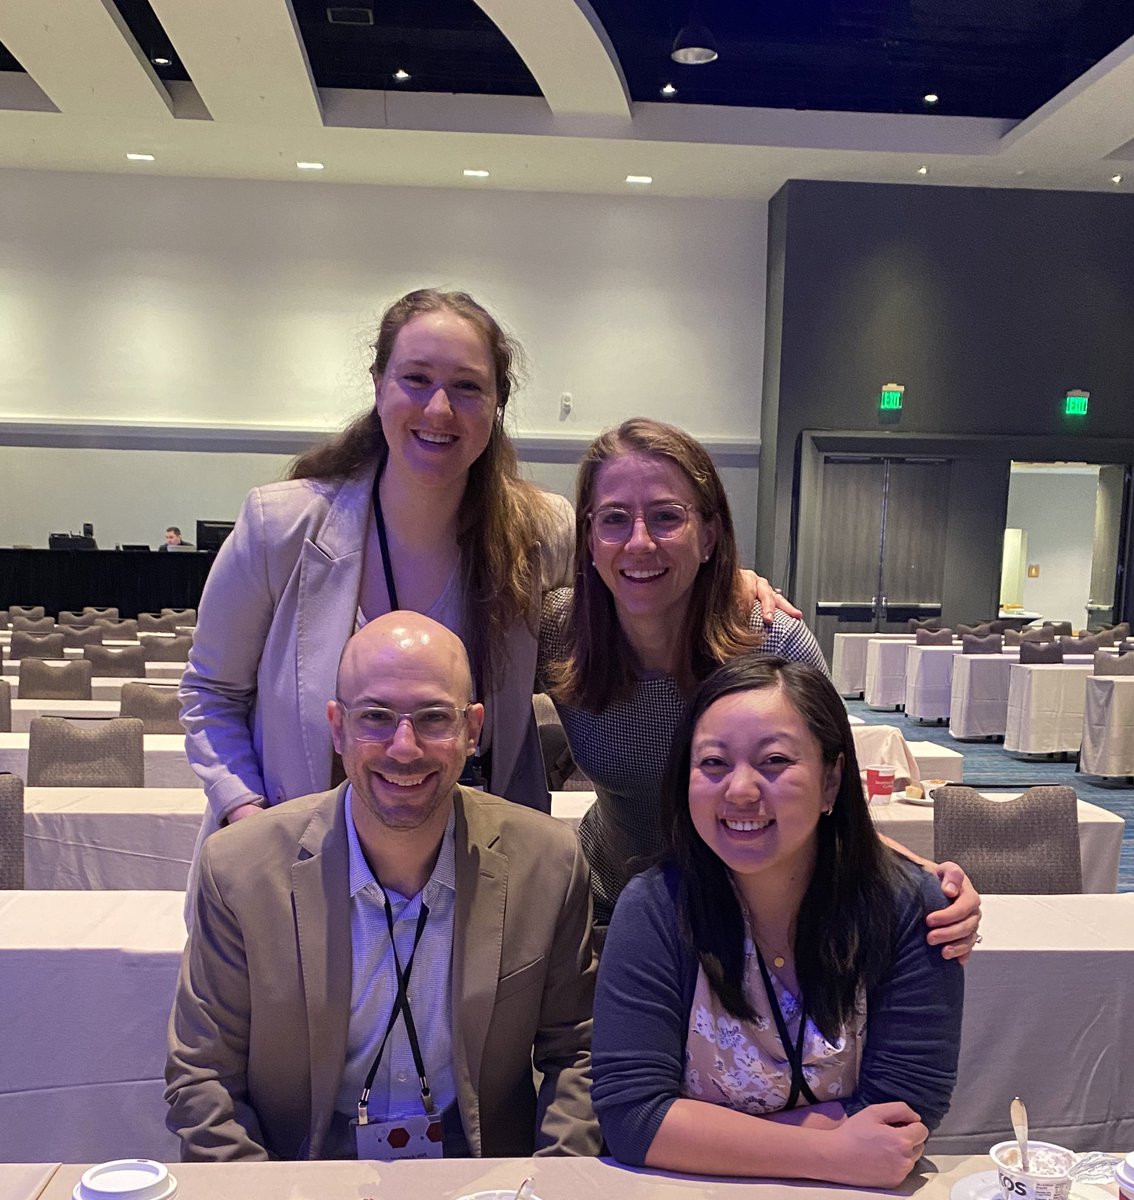 Happy to be at NRG #nrg2023 with cofellows @camillayumd and @dmargul1 and future Gyn Onc @ErikaJLampert ! And thankful for CCF Gyn Onc support to attend @RobertoVargasMD @CCLRI @CleClinicMD